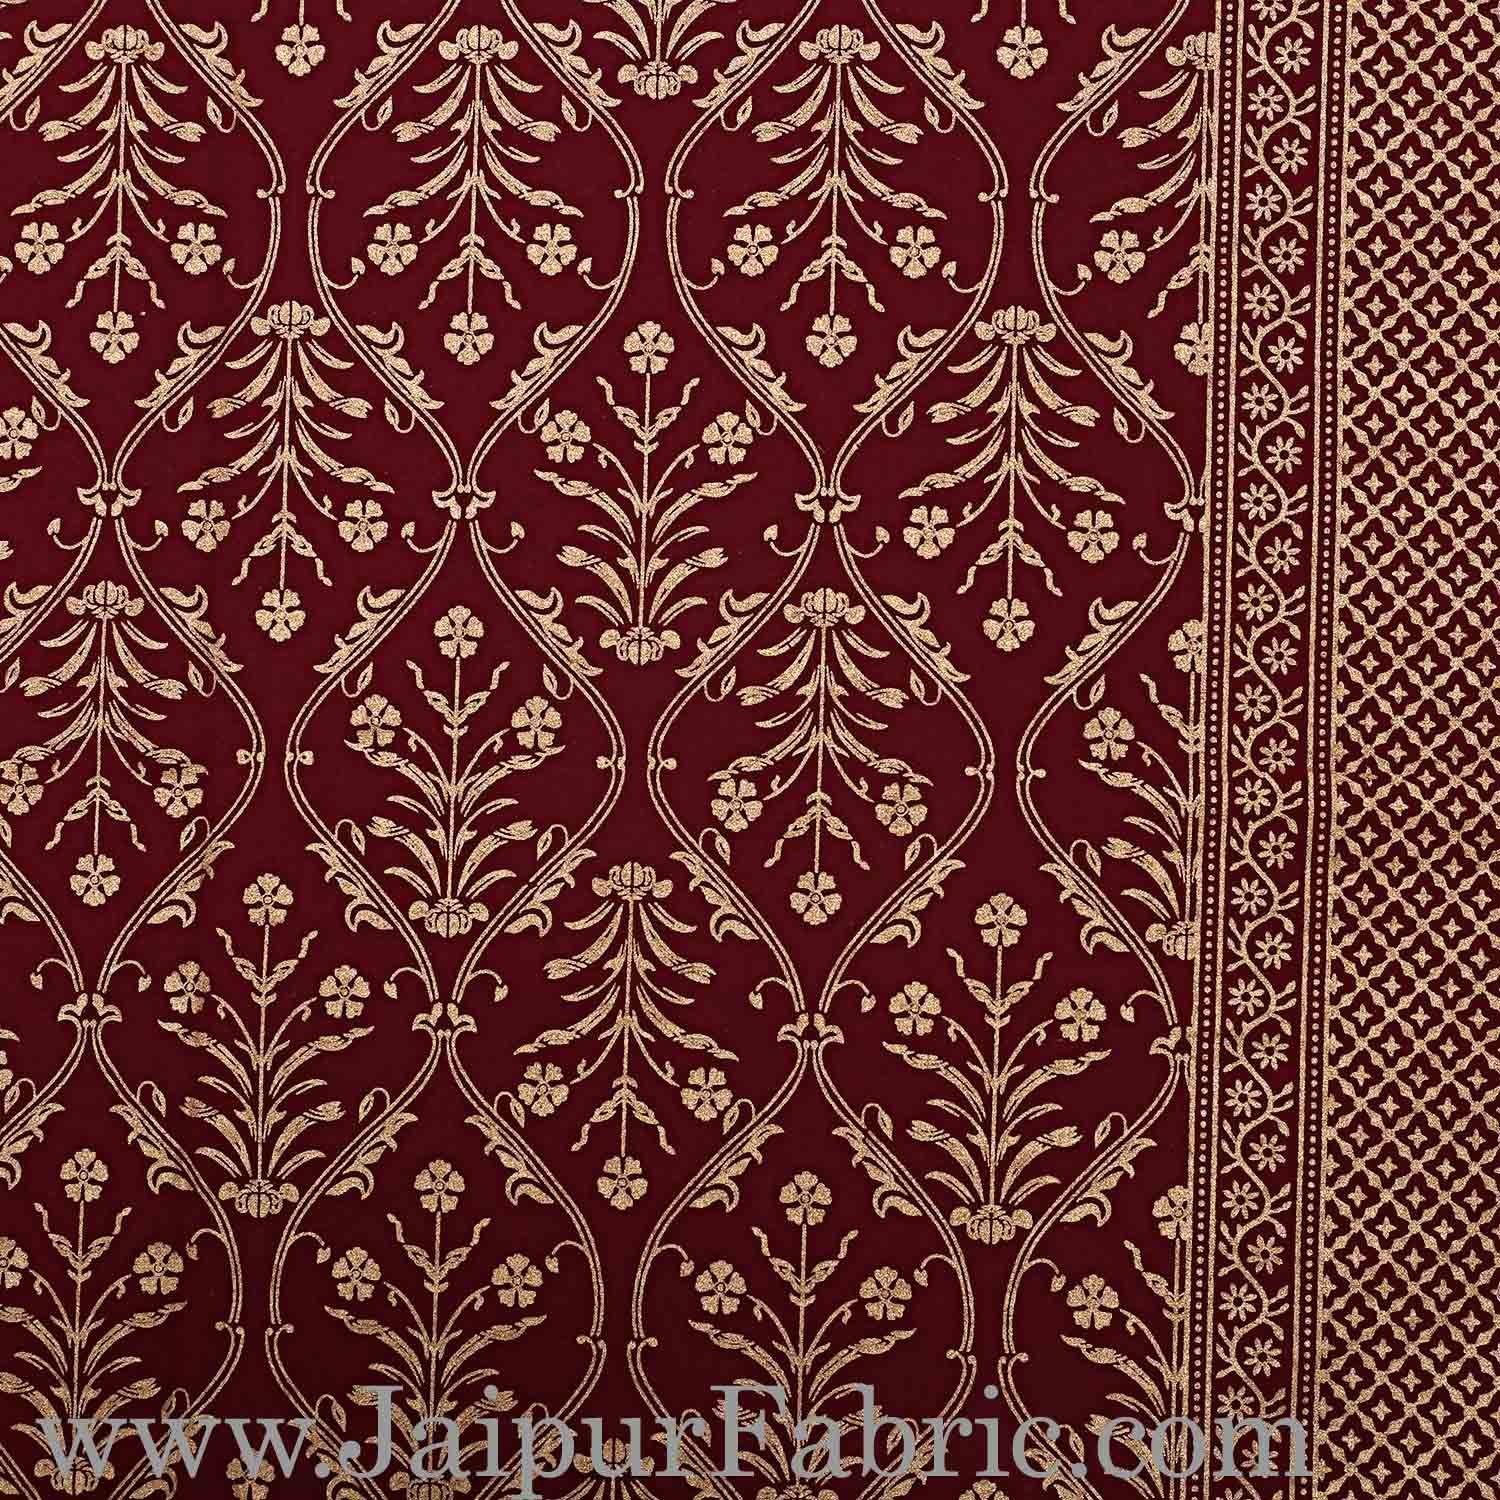 Double Bed Sheet  With Shining Gold Print Maroon Base Gold Retro Pattern Super Fine Cotton  Double Bed Sheet